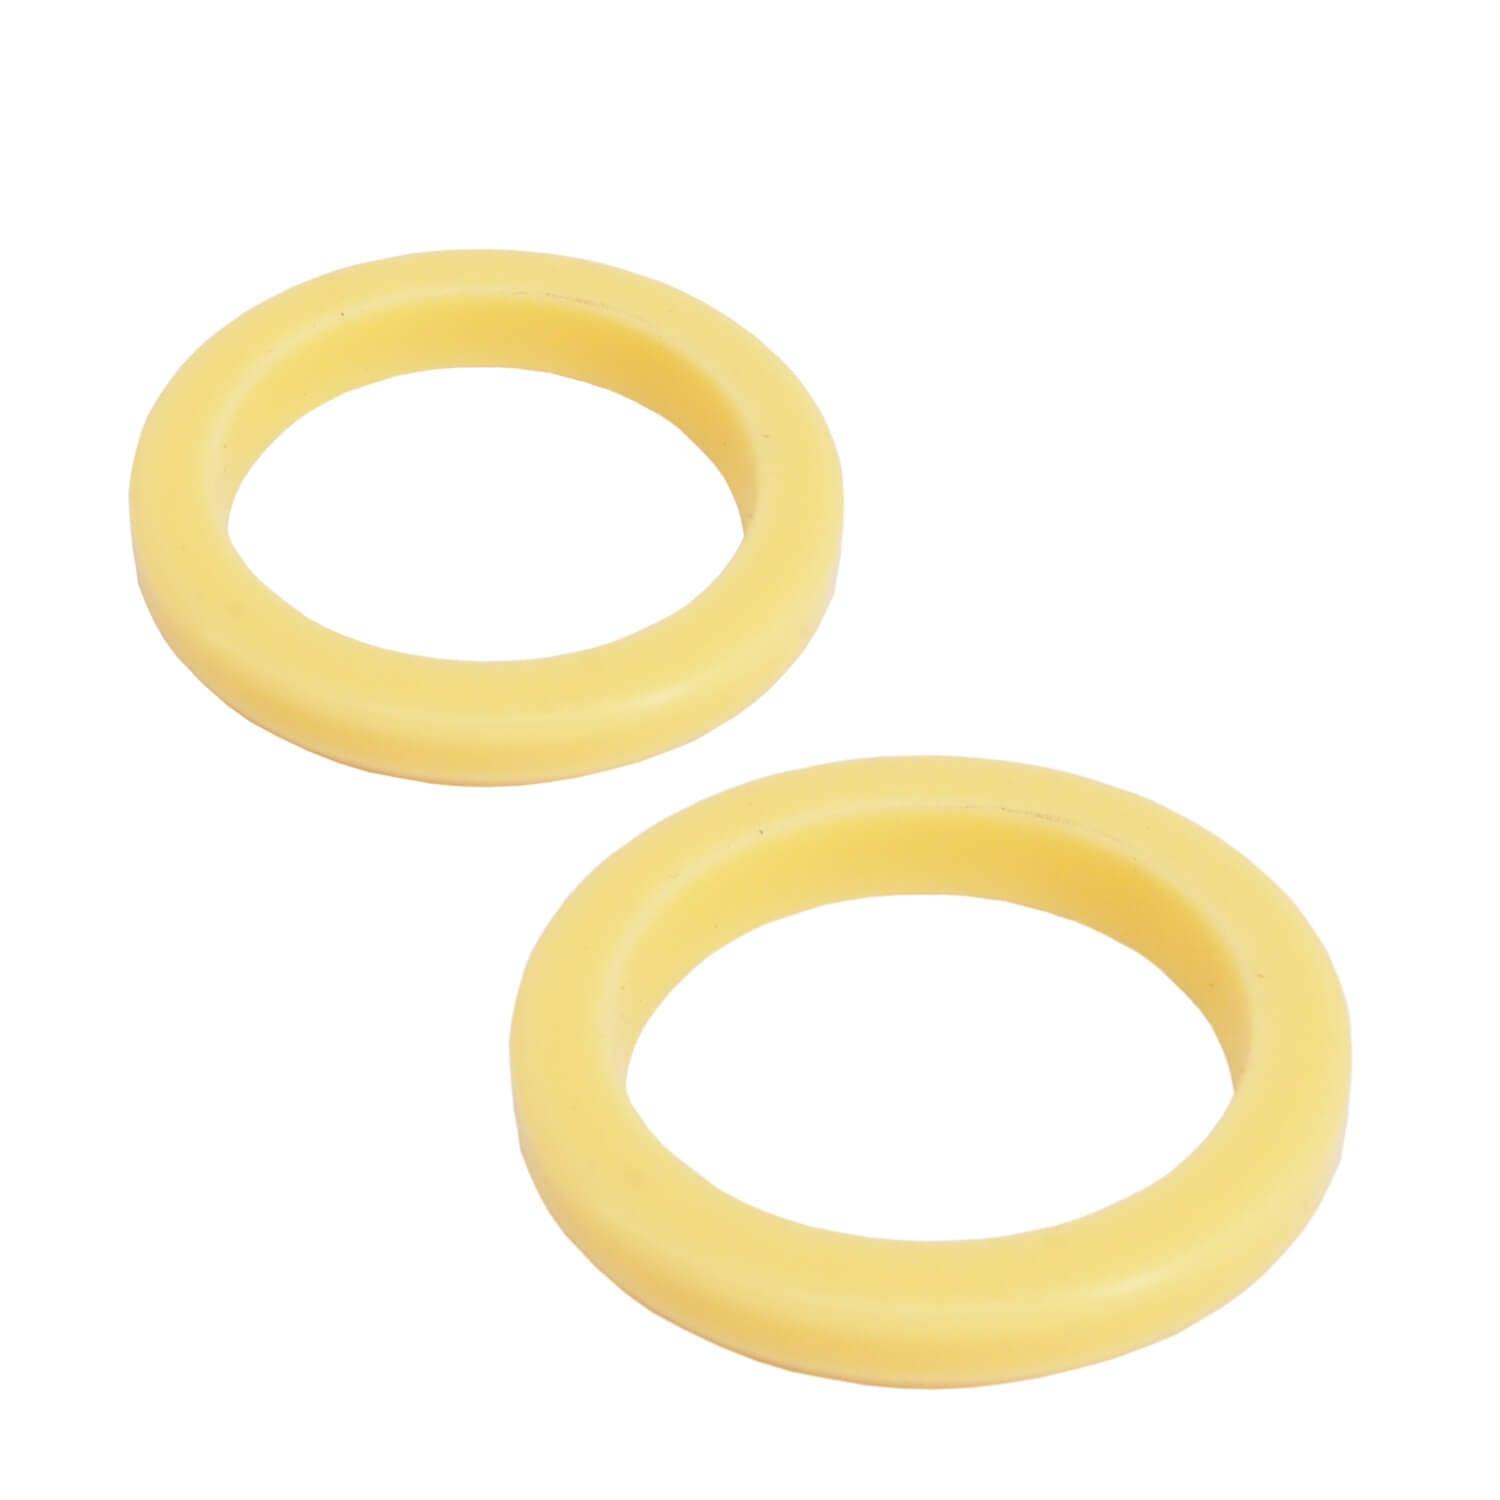 2X Coffee Group Head Seal For Breville Espresso BES810 BES840 BES870 BES860/02.6 Sparesbarn